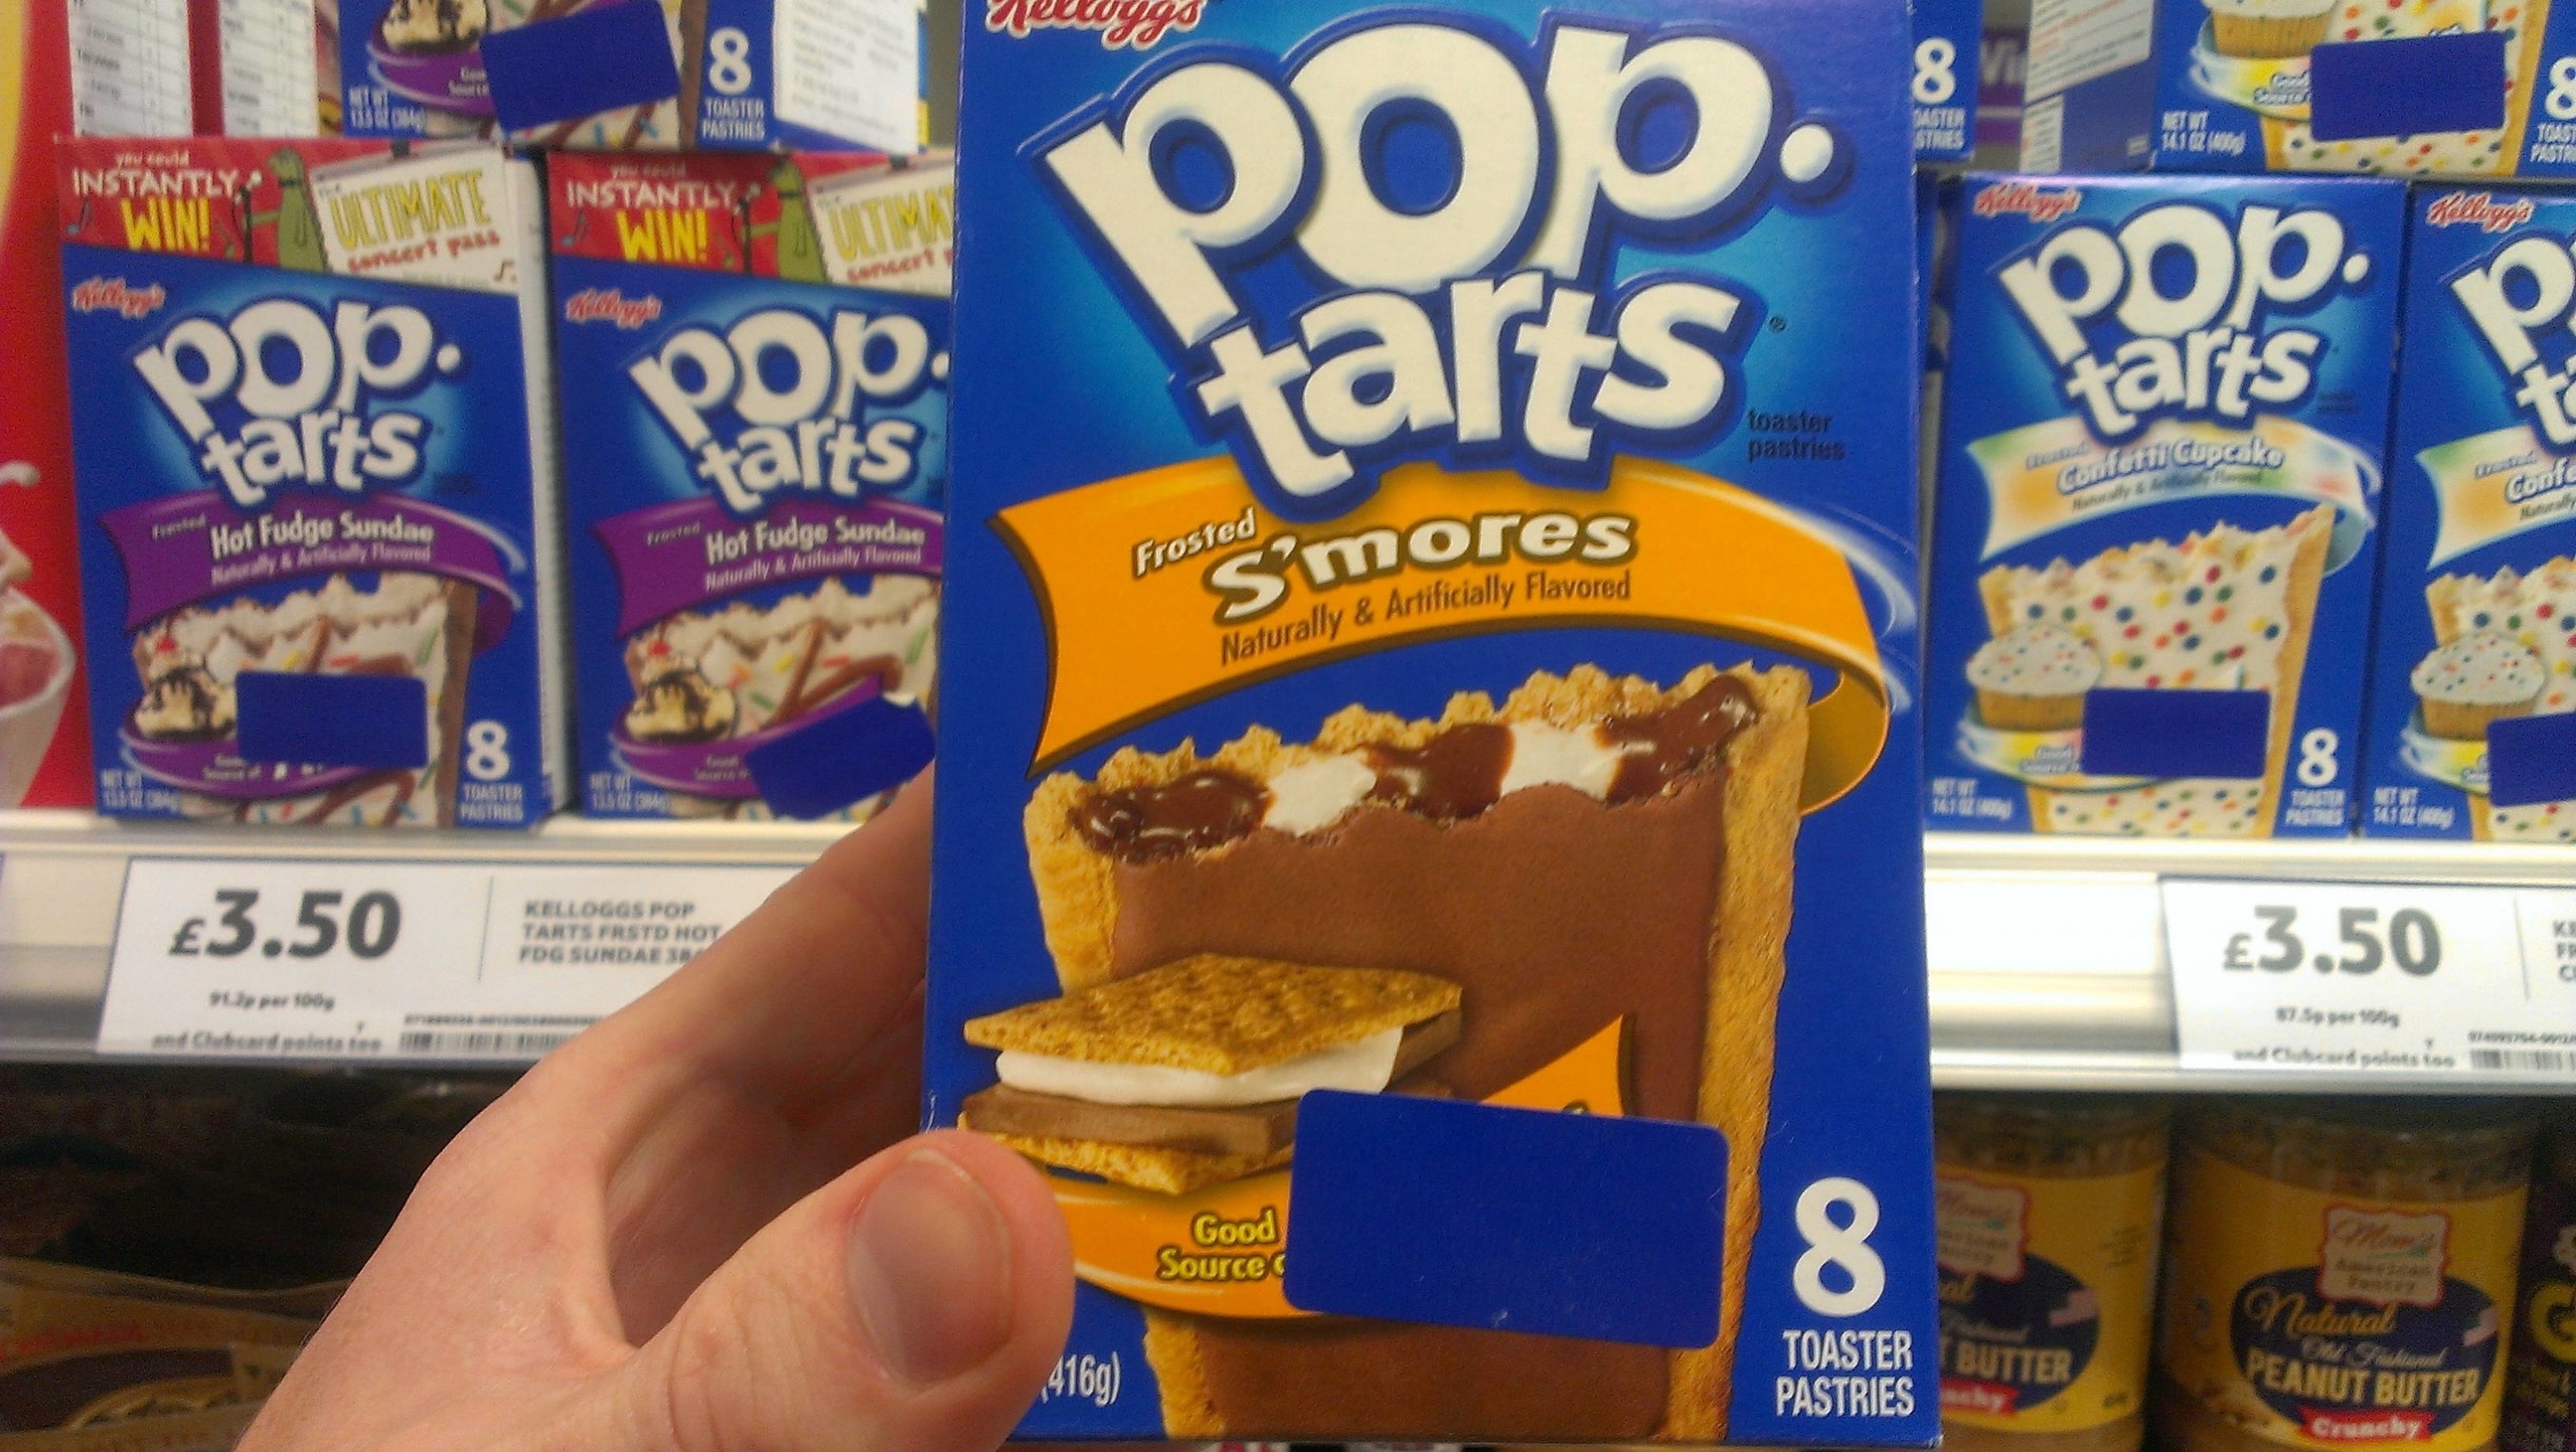 Someone holds up a box of S&#x27;mores Pop-Tarts with other flavors on the shelf and the price 3.50 in pounds sterling